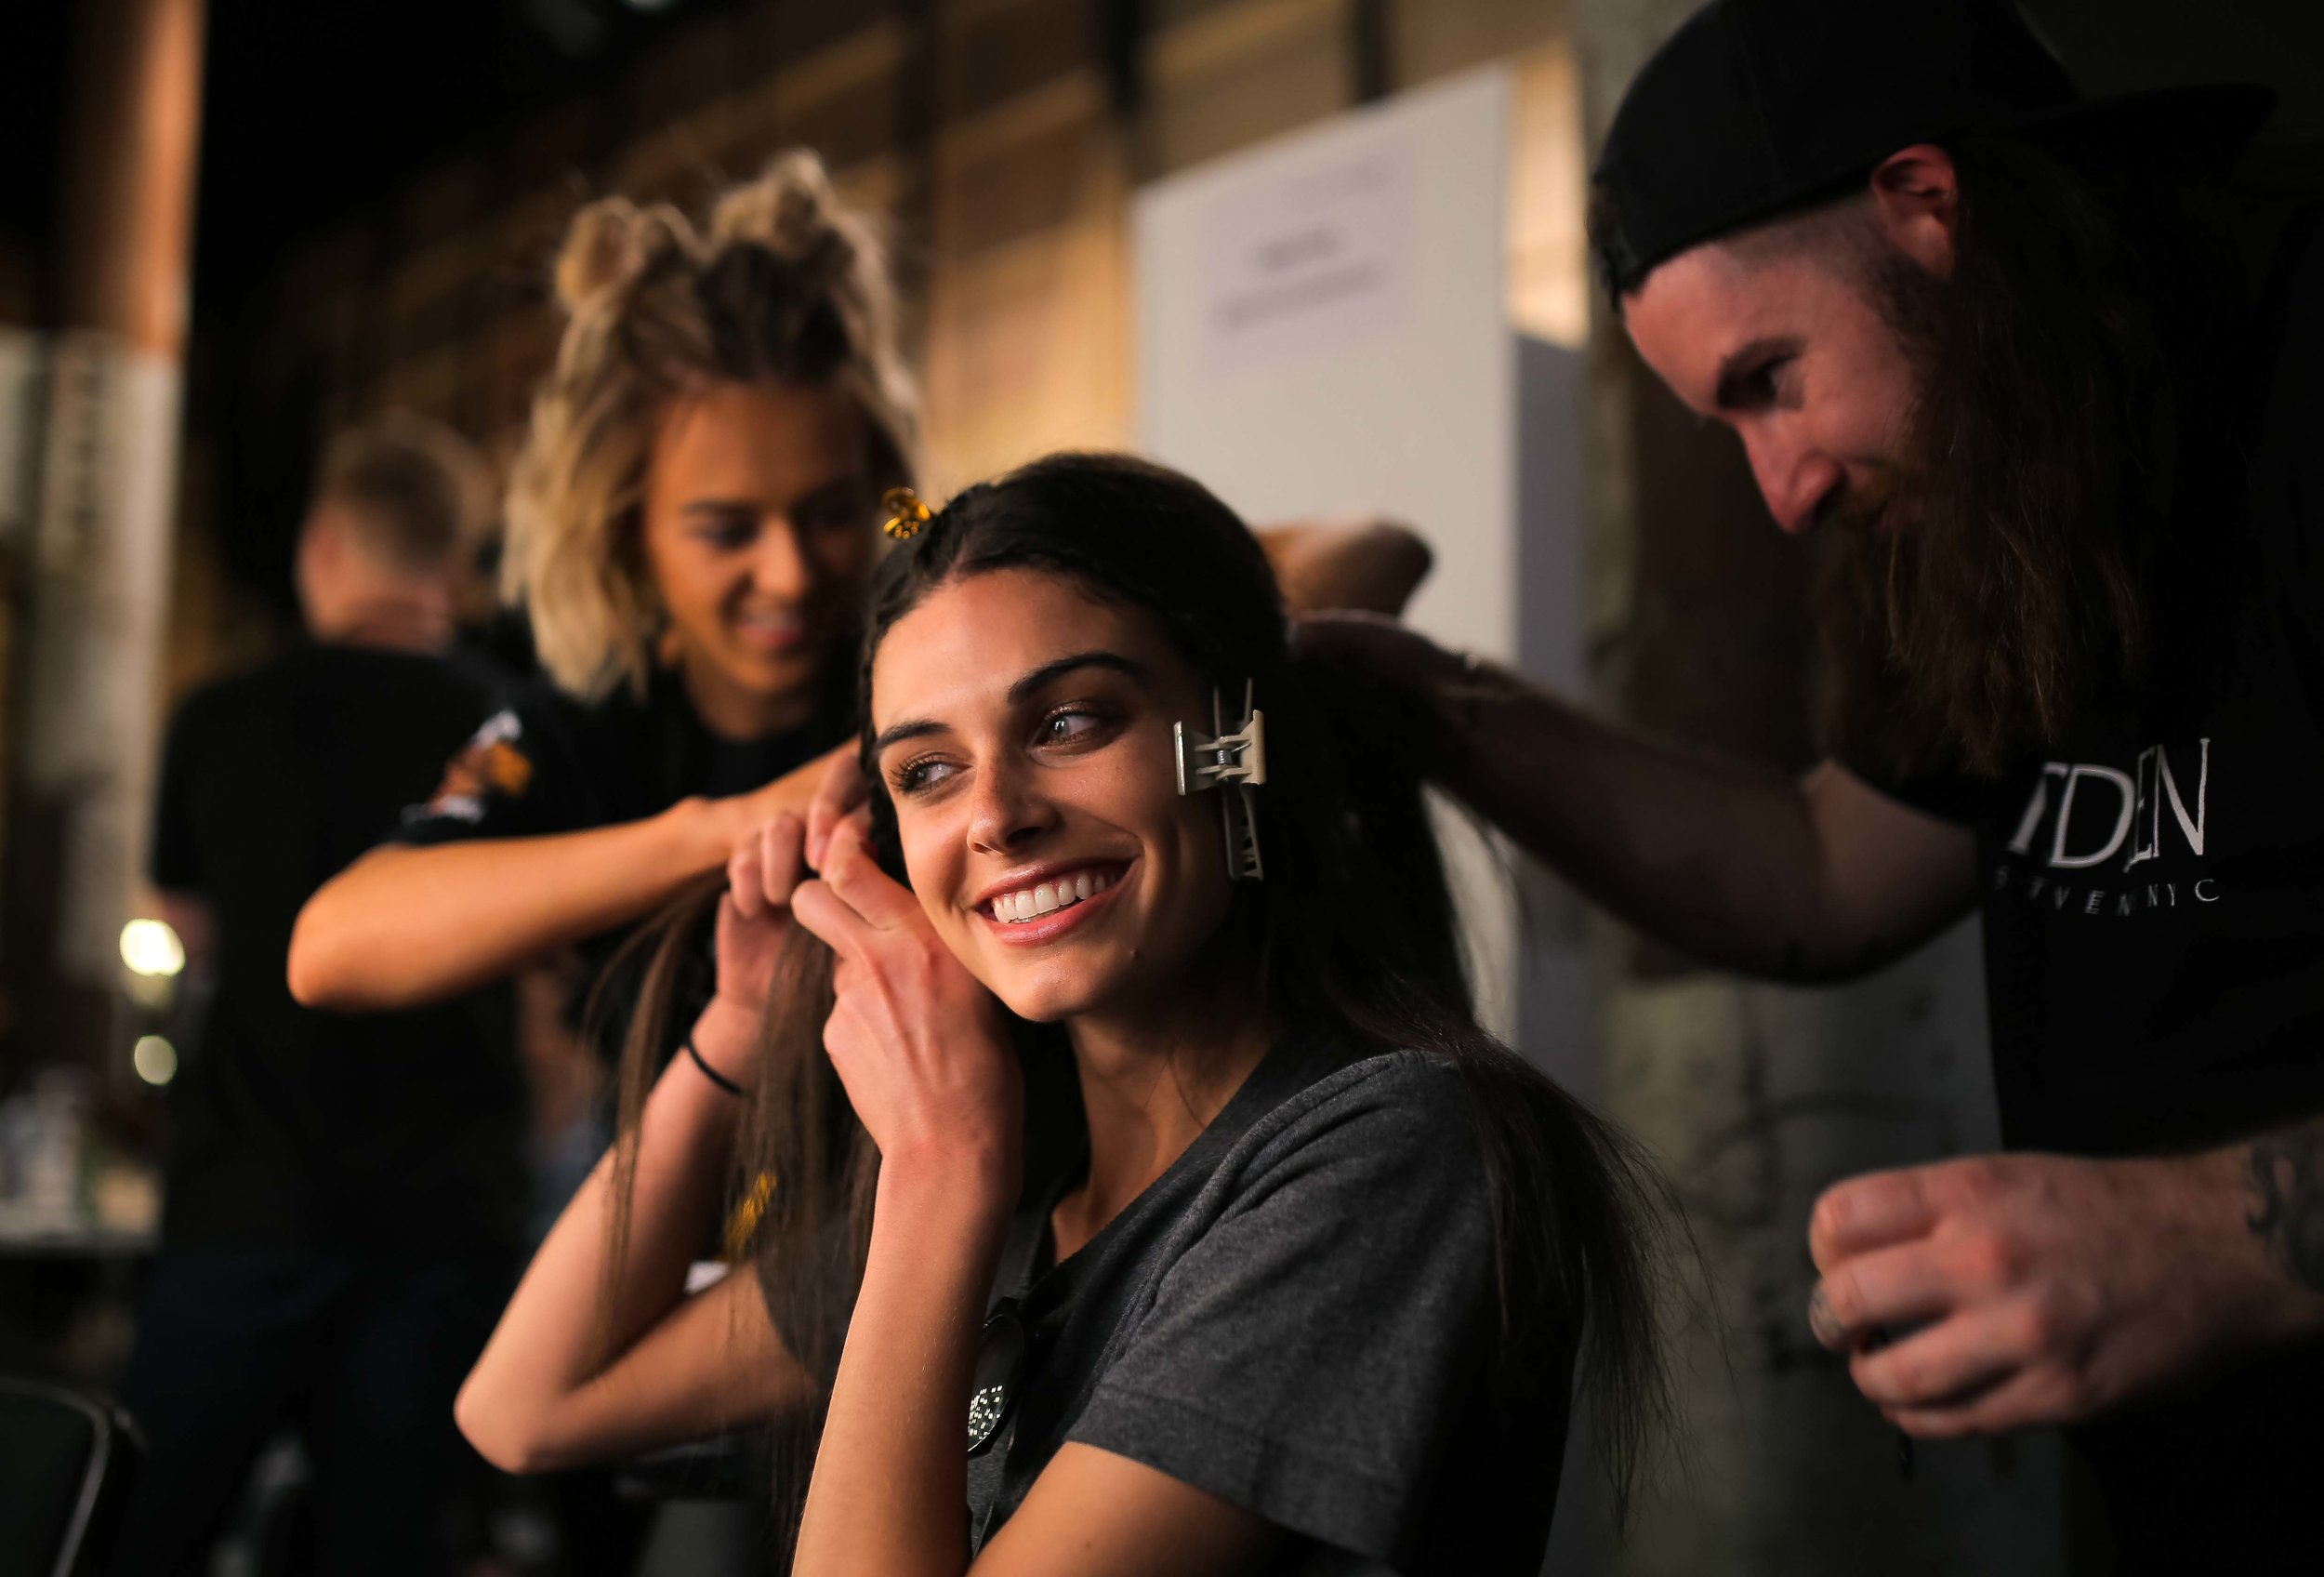  A model has her hair prepared back stage before a runway show at Fashion Week Australia in Sydney, Australia. 